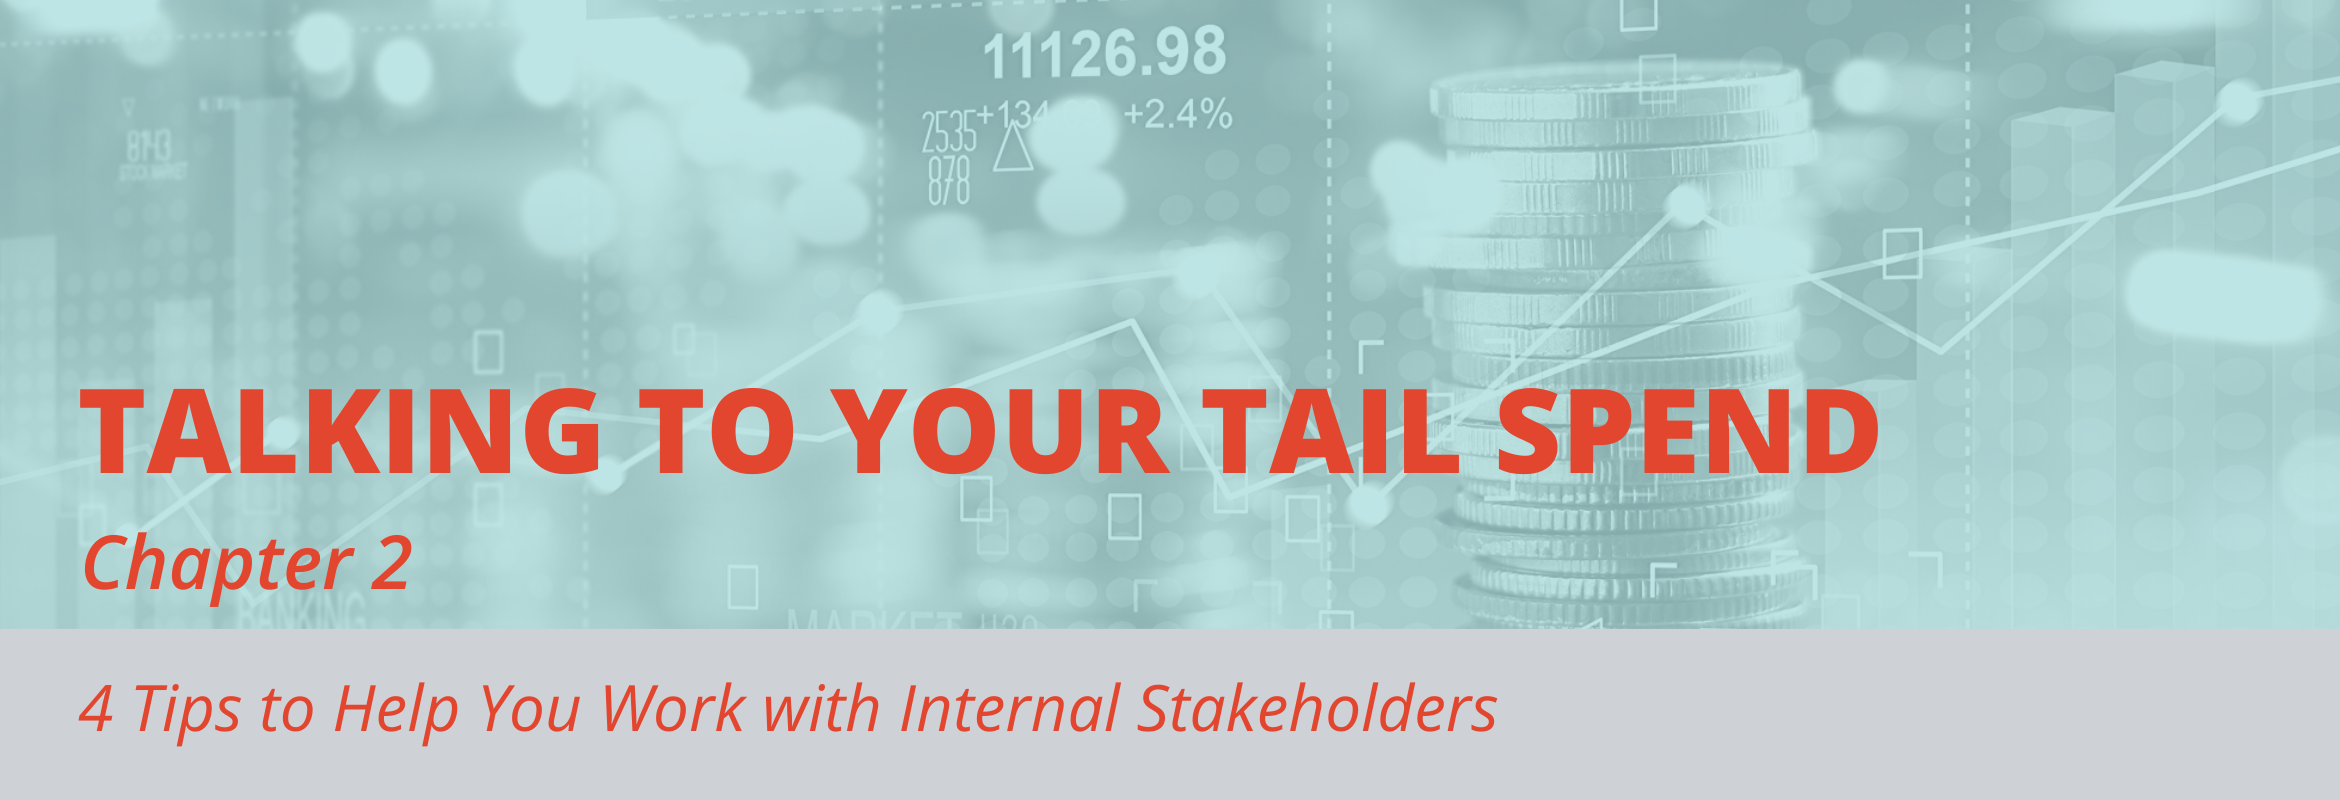 Advice on how to work with internal stakeholders to manage tail spend